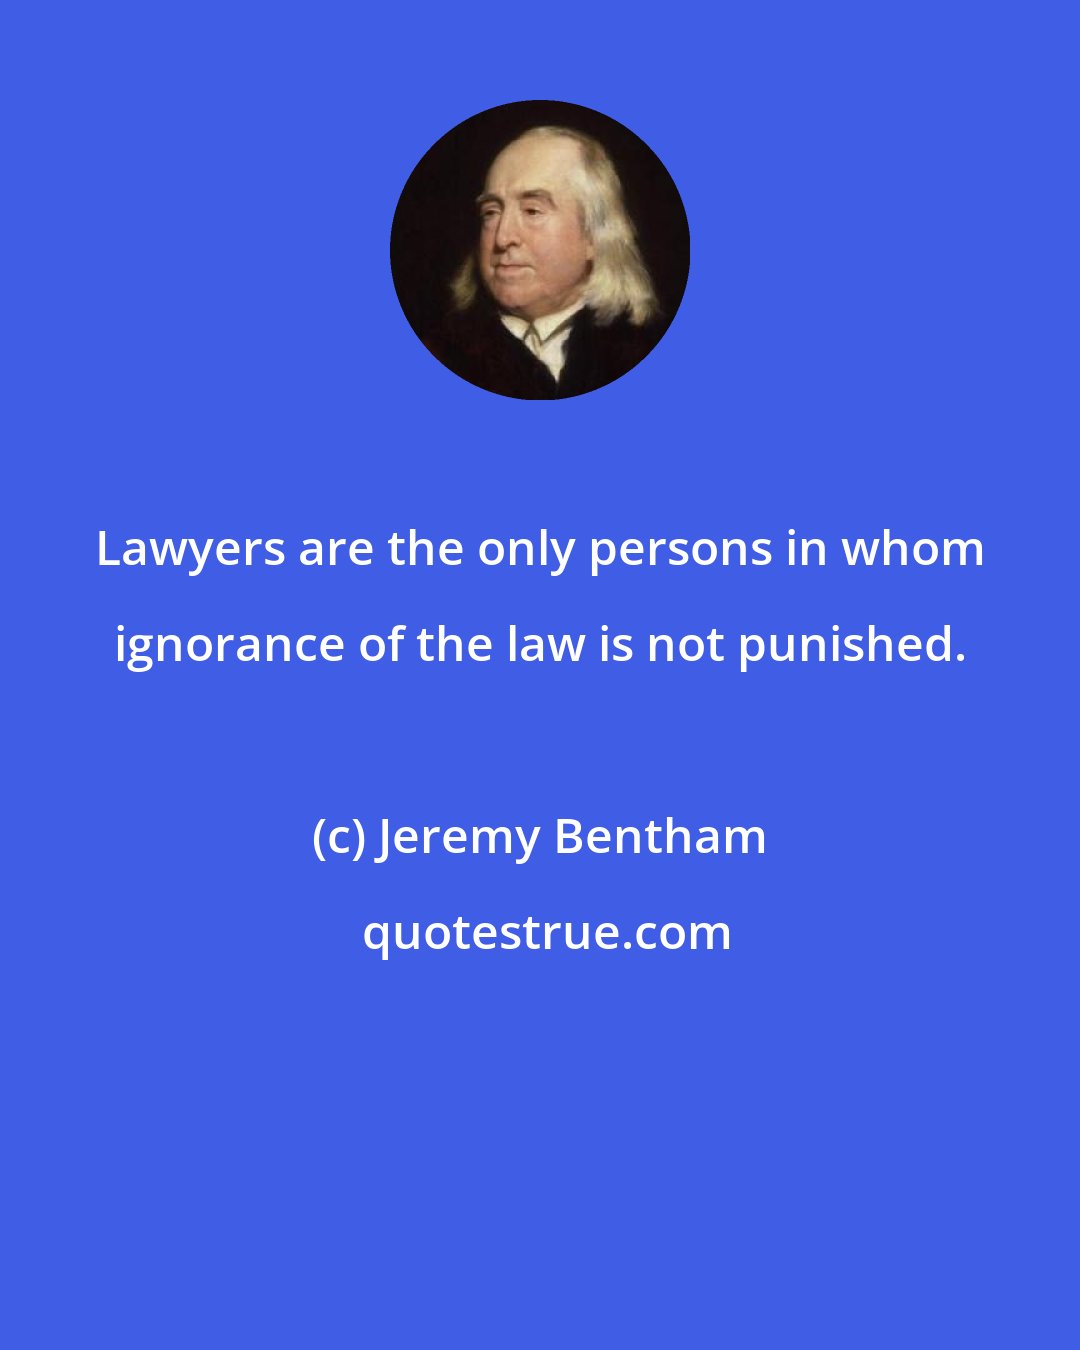 Jeremy Bentham: Lawyers are the only persons in whom ignorance of the law is not punished.